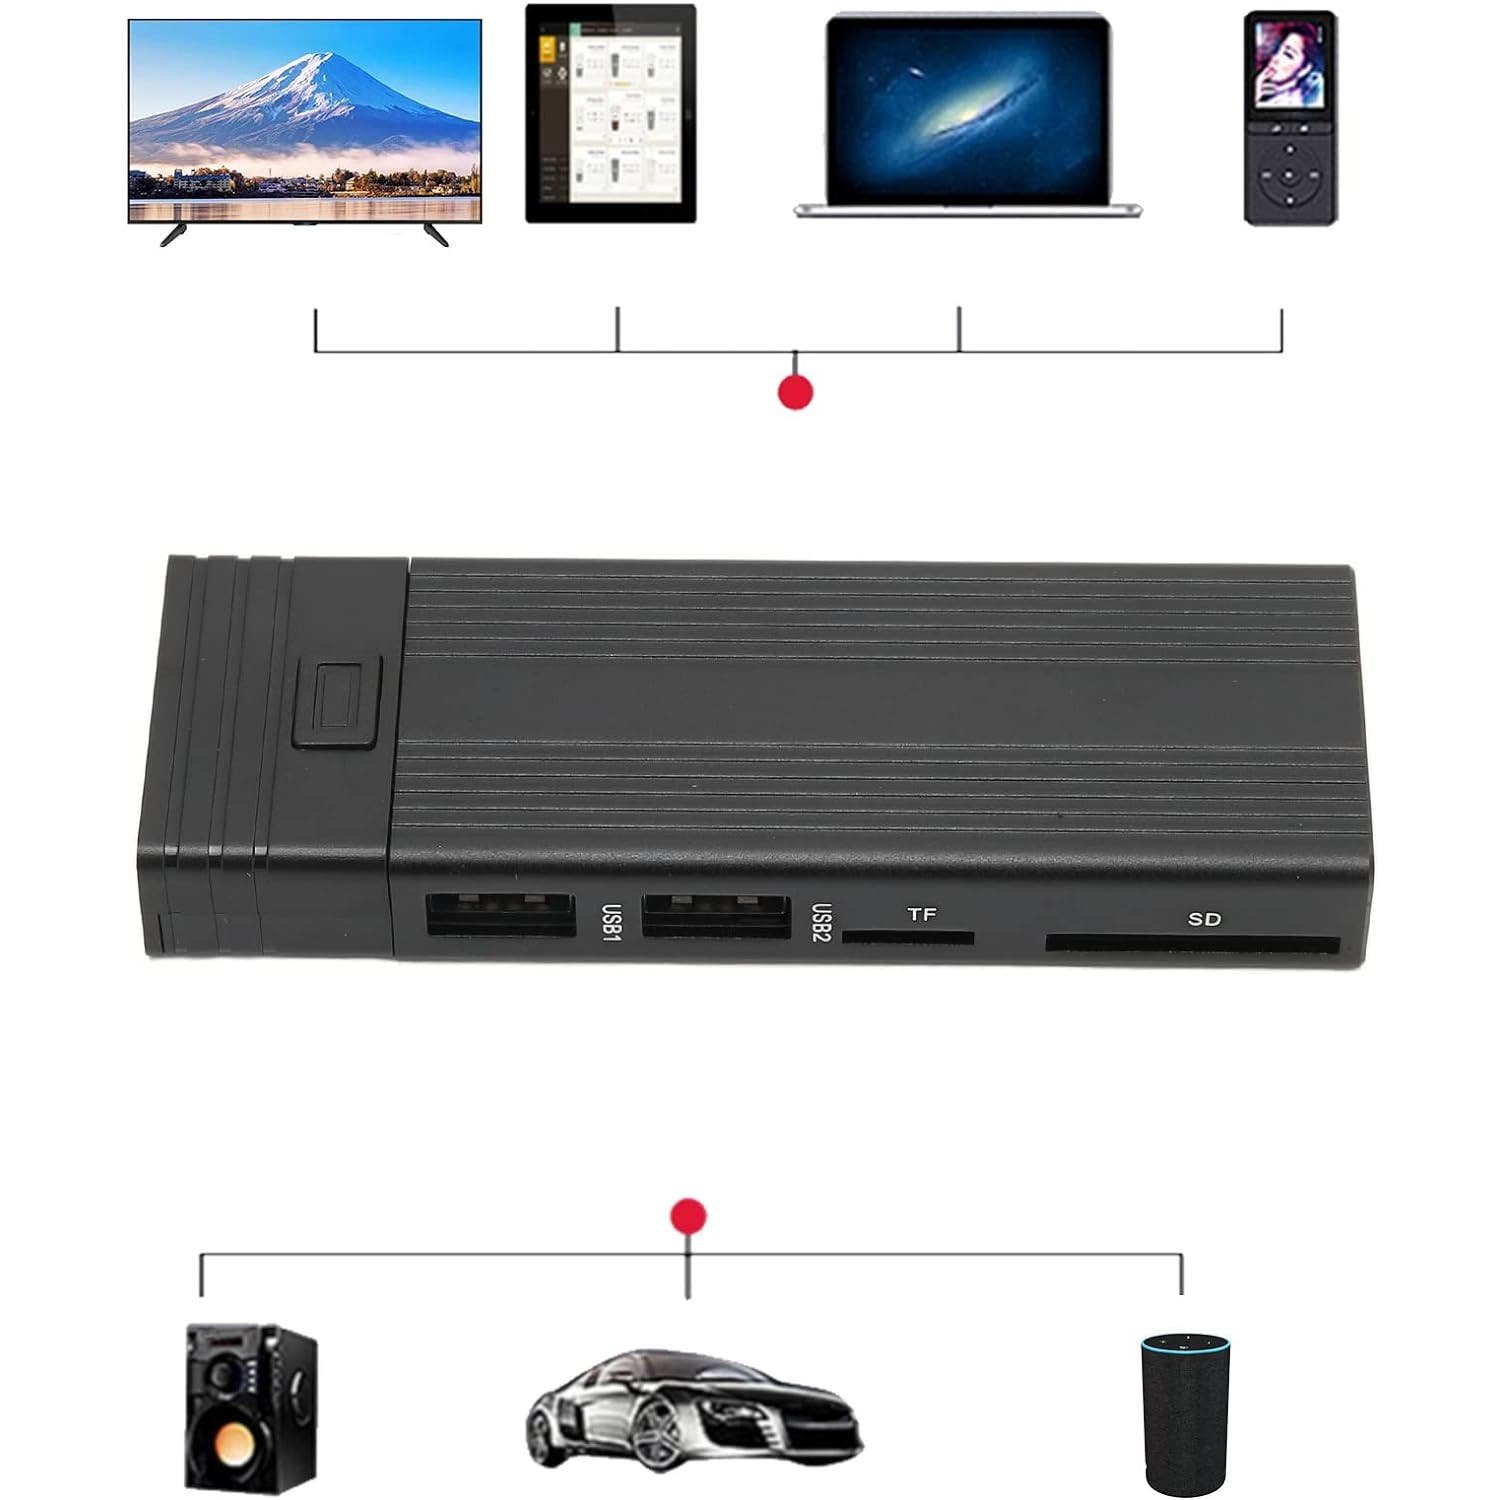 M.2 Nvme SSD Enclosure 4 in 1 USB3.0 10Gbps Auto for Phone Tablet Desktop(Black) gfEqbfq9M